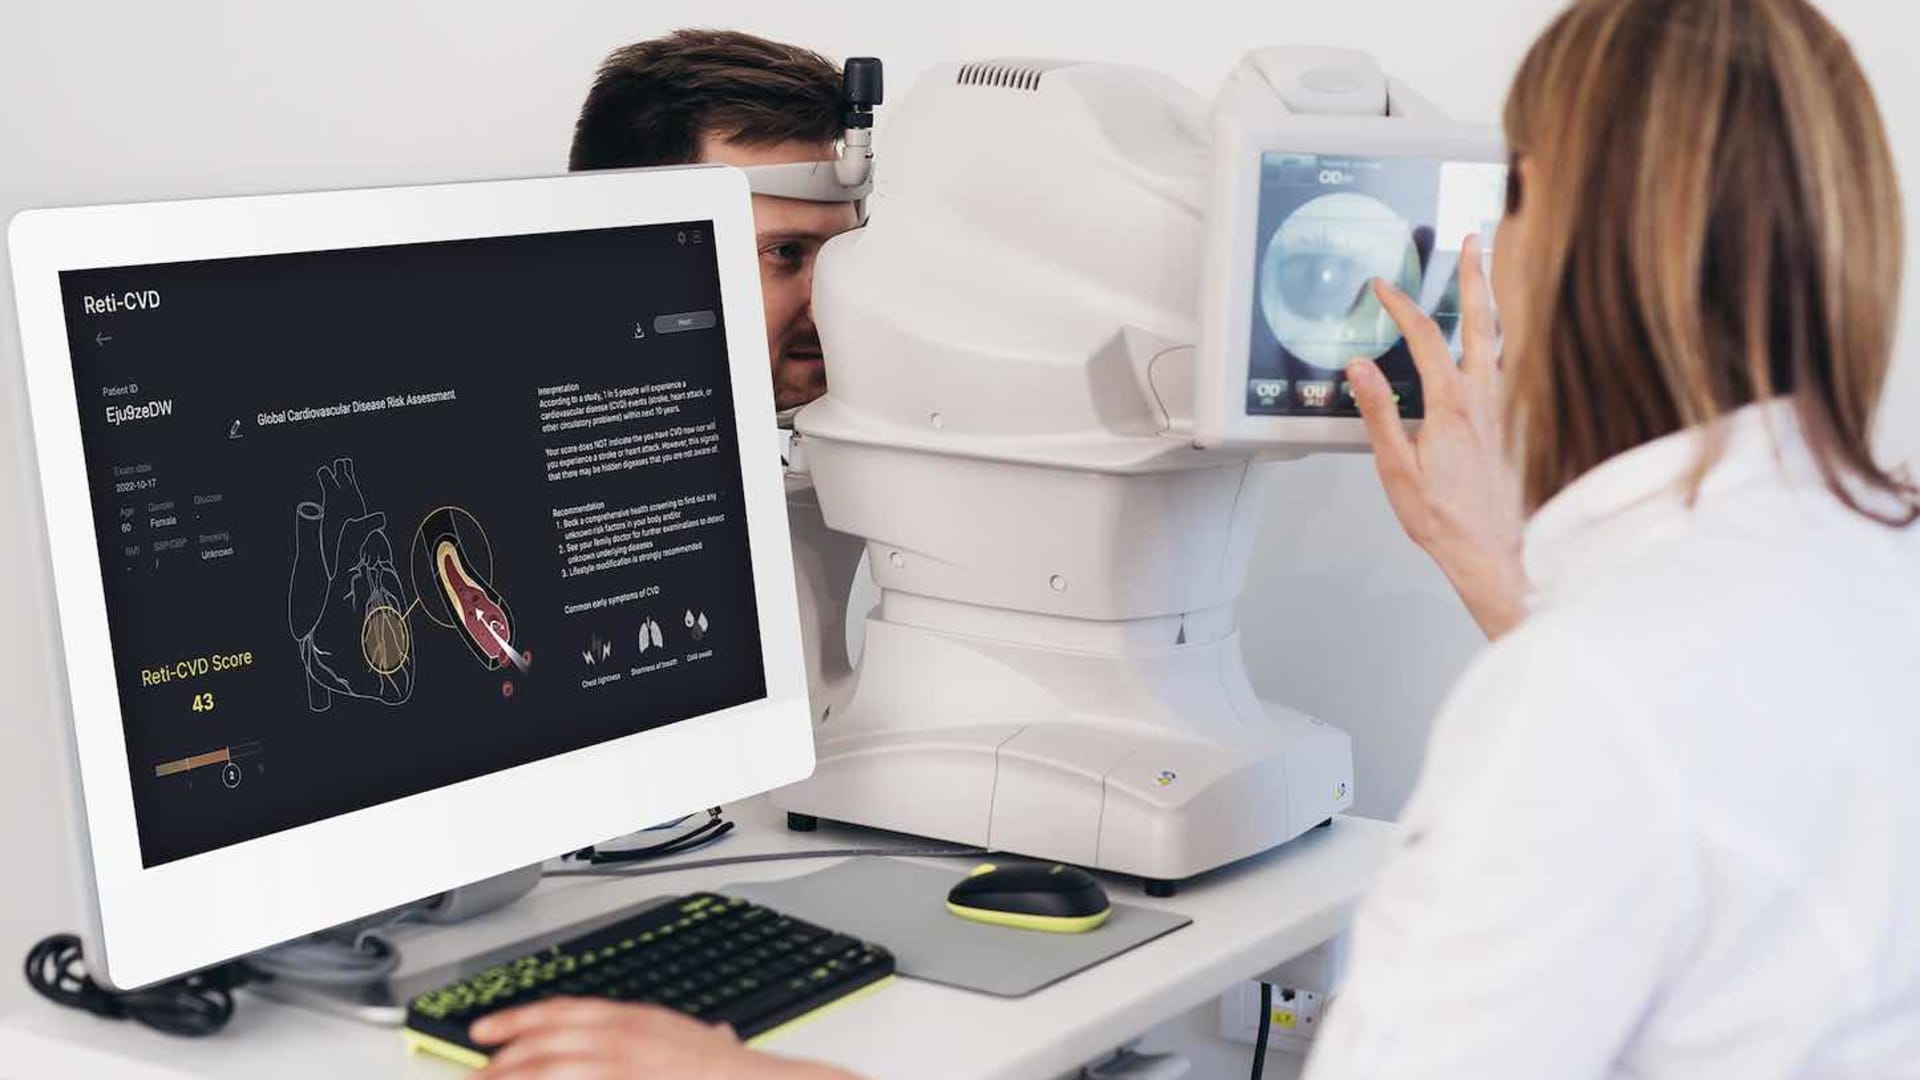 Mediwhale says it provides assessment of cardiovascular risks through artificial intelligence and retinal imagery.